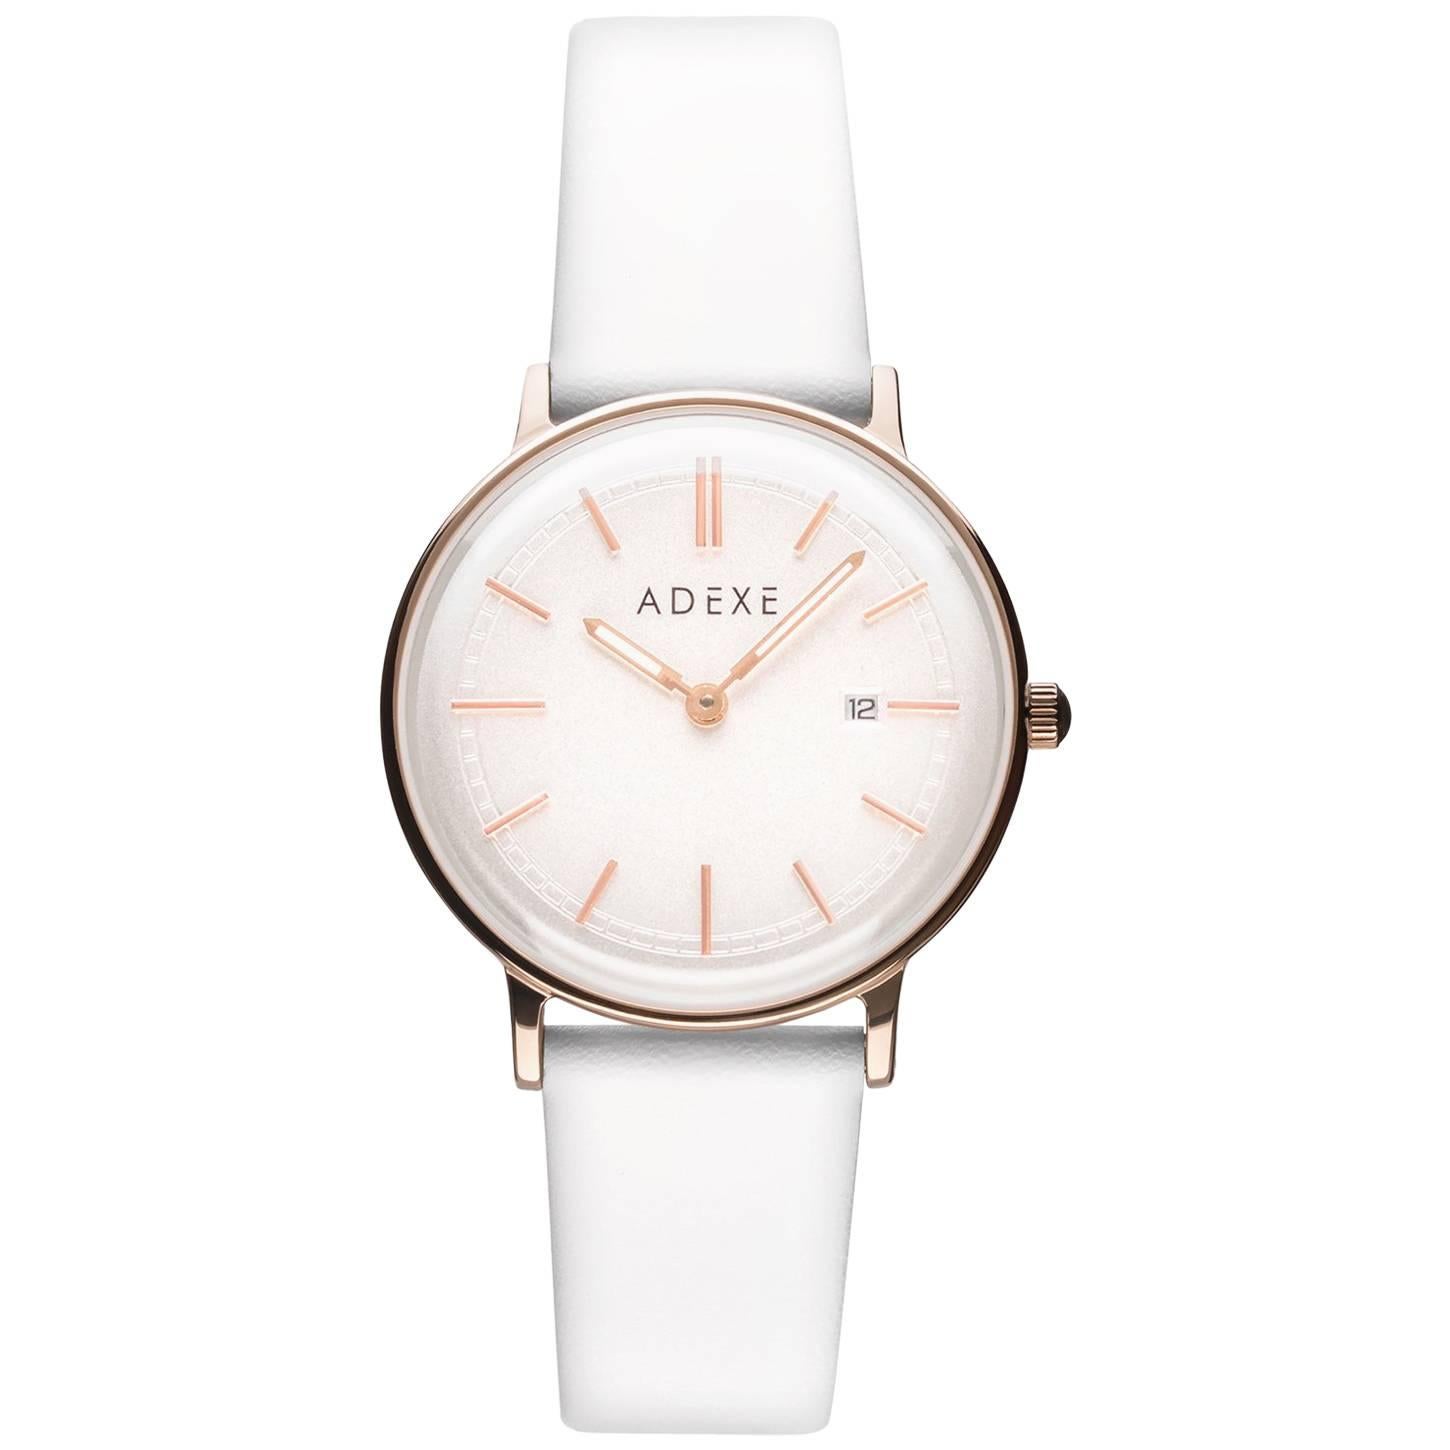 Adexe White and Rose Gold Stainless Steel Genuine Italian Leather Quartz Watch